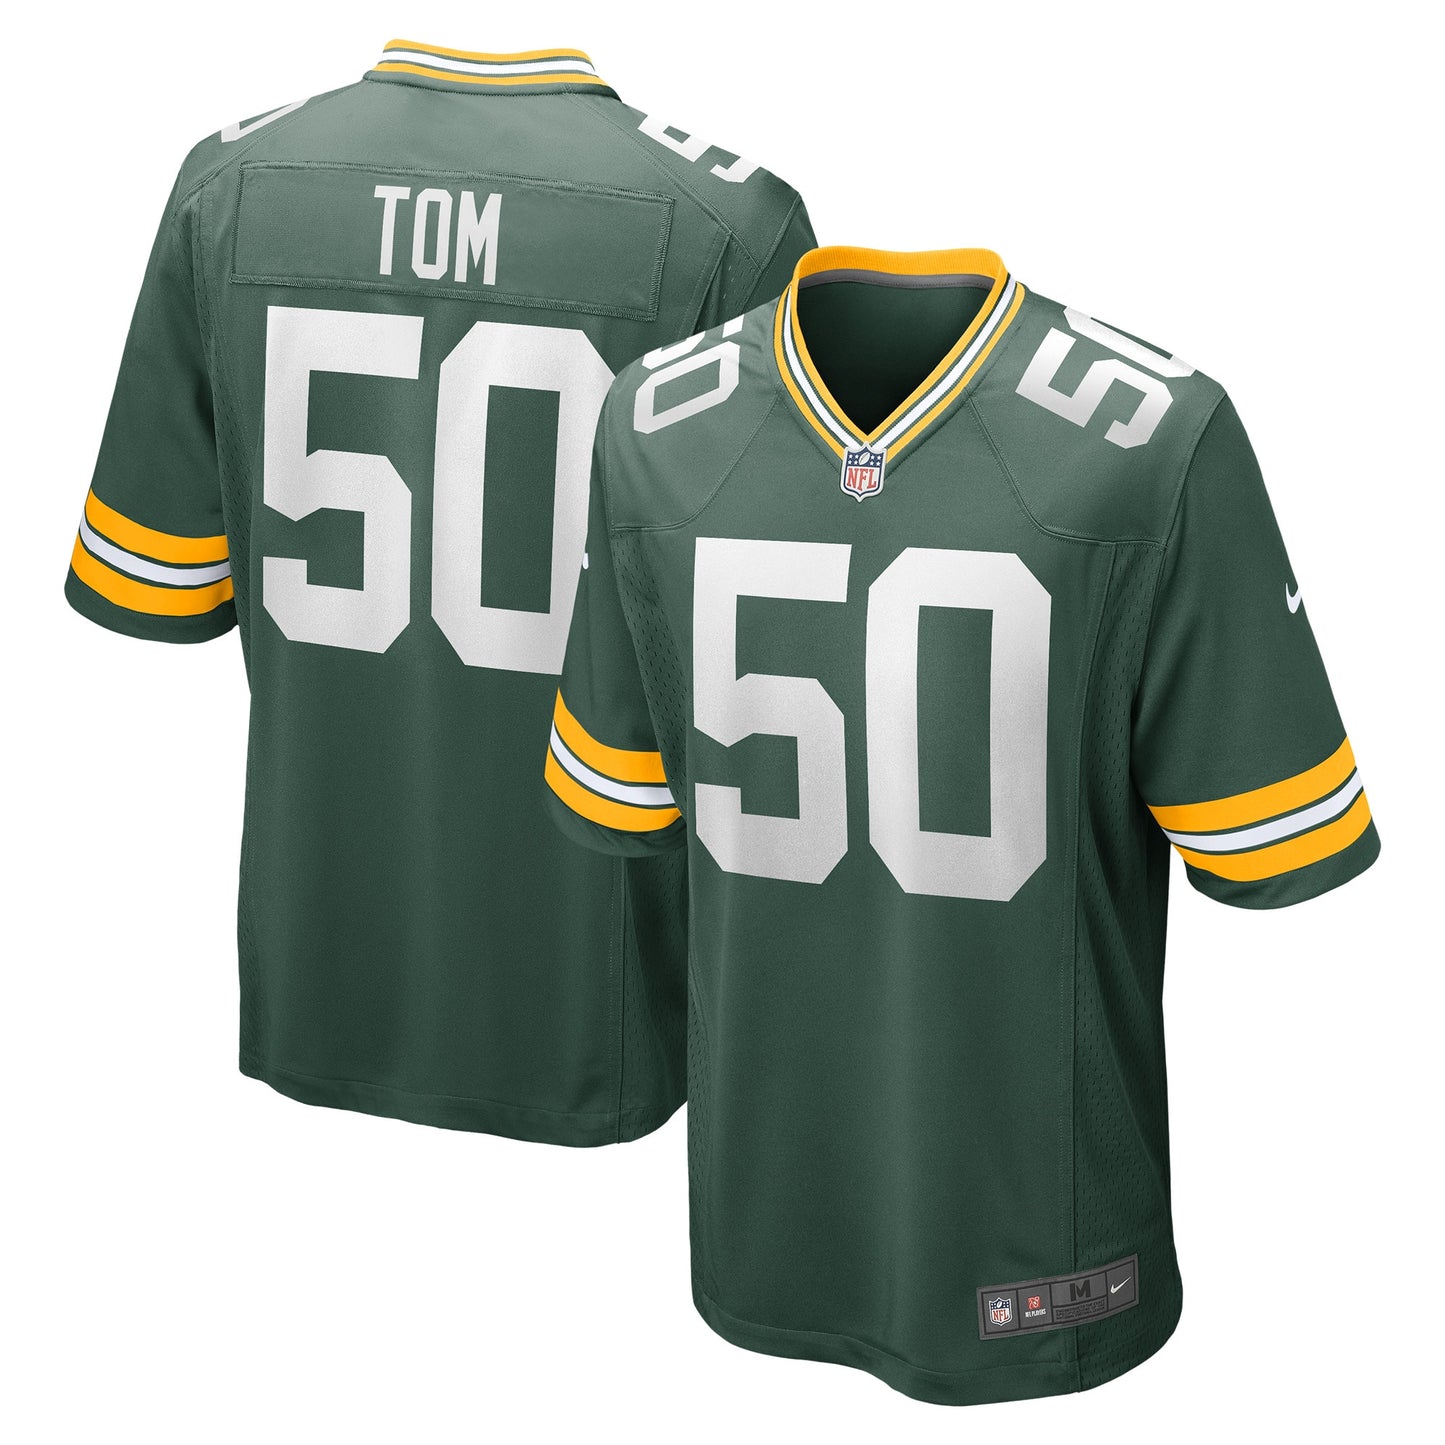 Zach Tom Green Bay Packers Nike Game Player Jersey - Green